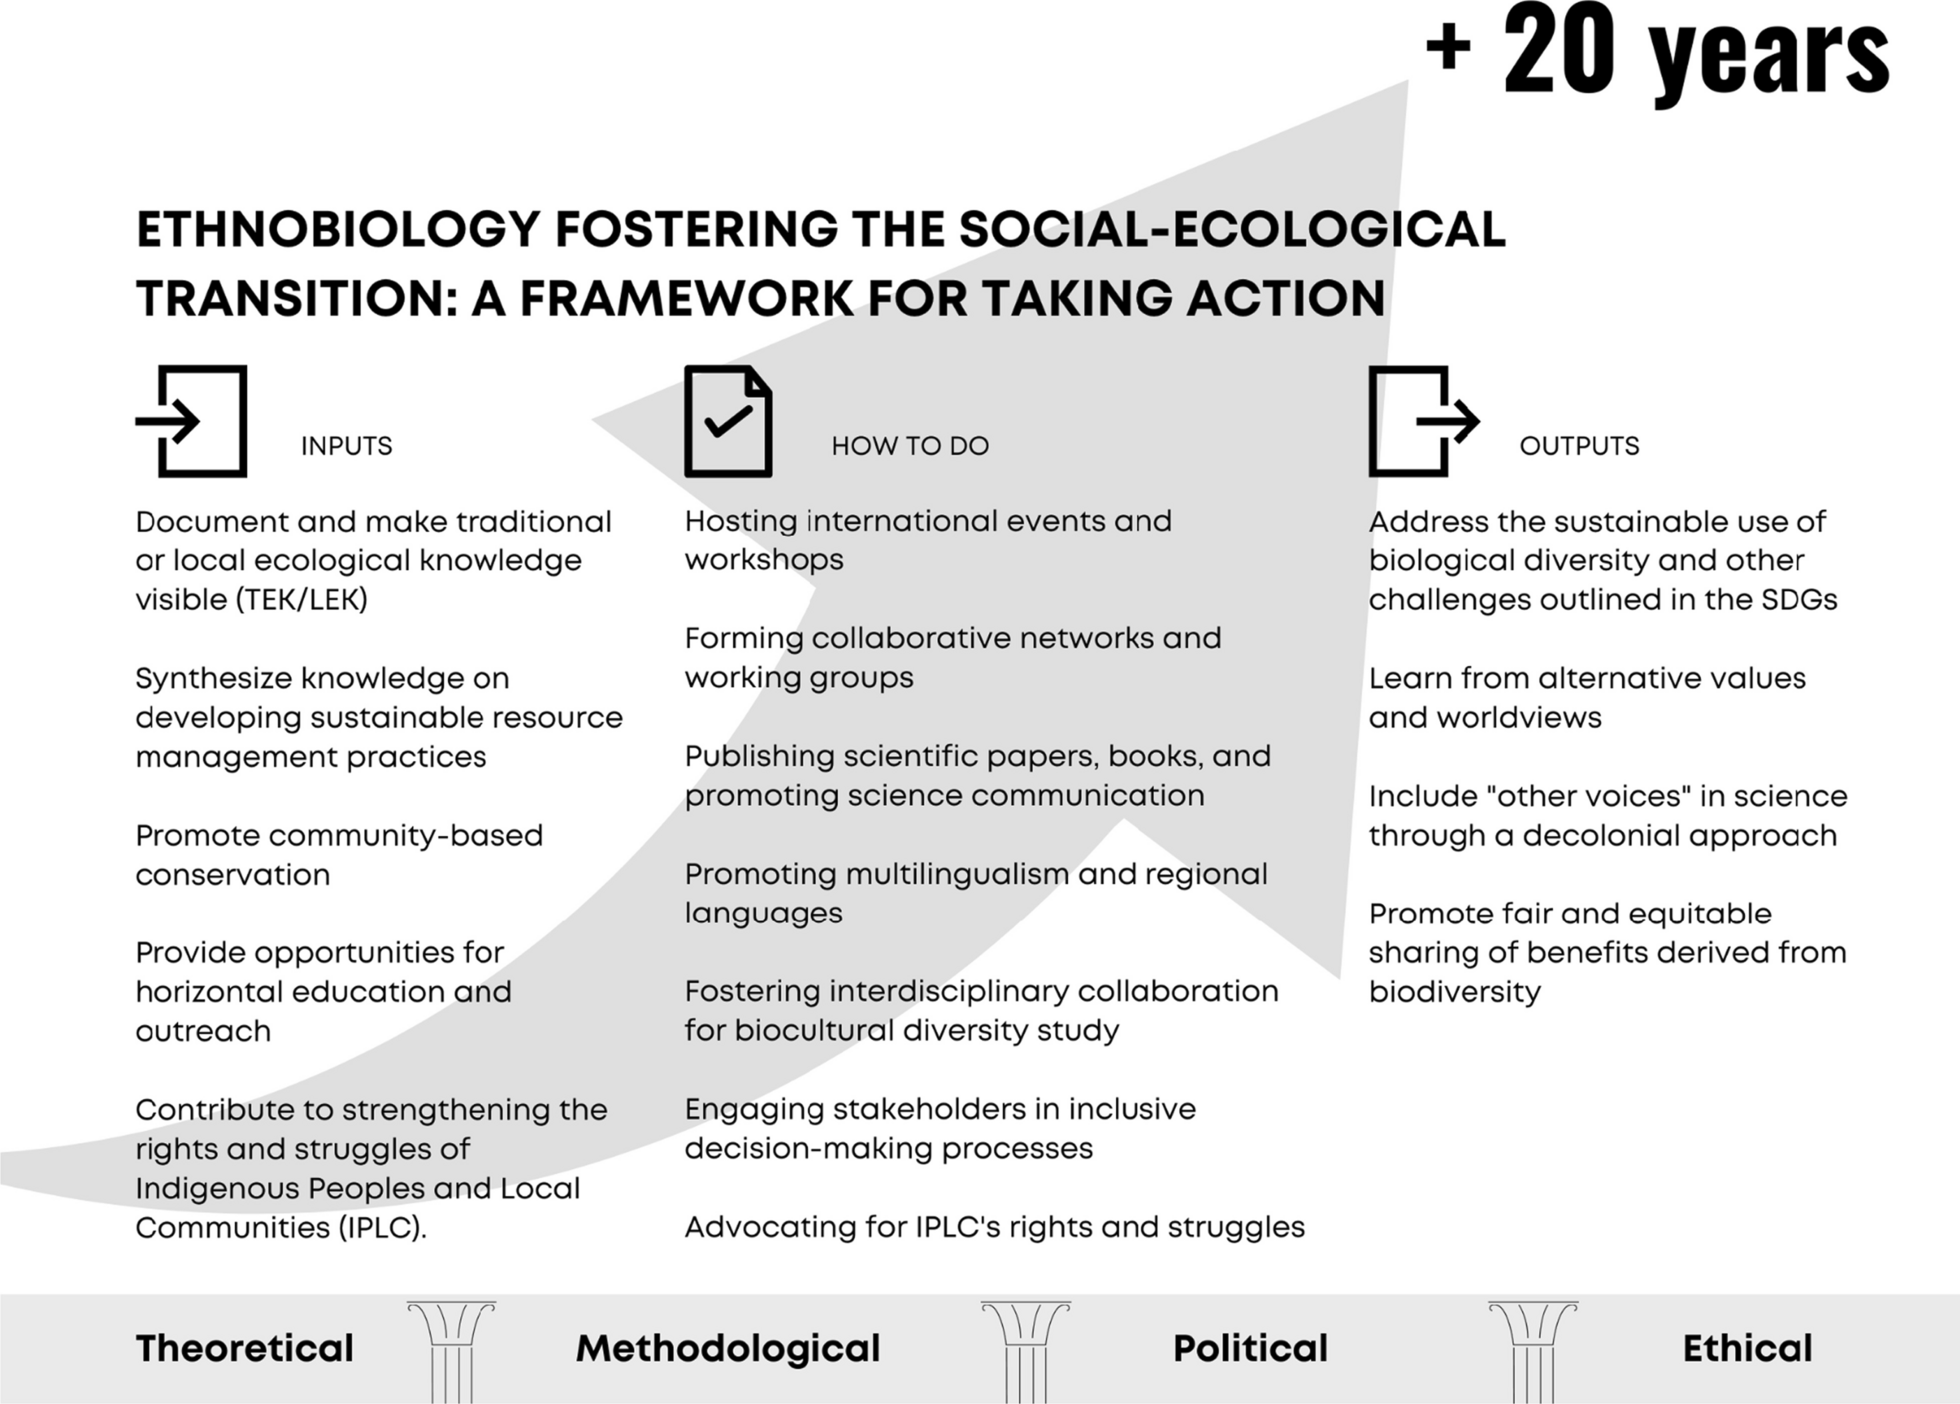 Advancing ethnobiology for the ecological transition and a more inclusive and just world: a comprehensive framework for the next 20 years